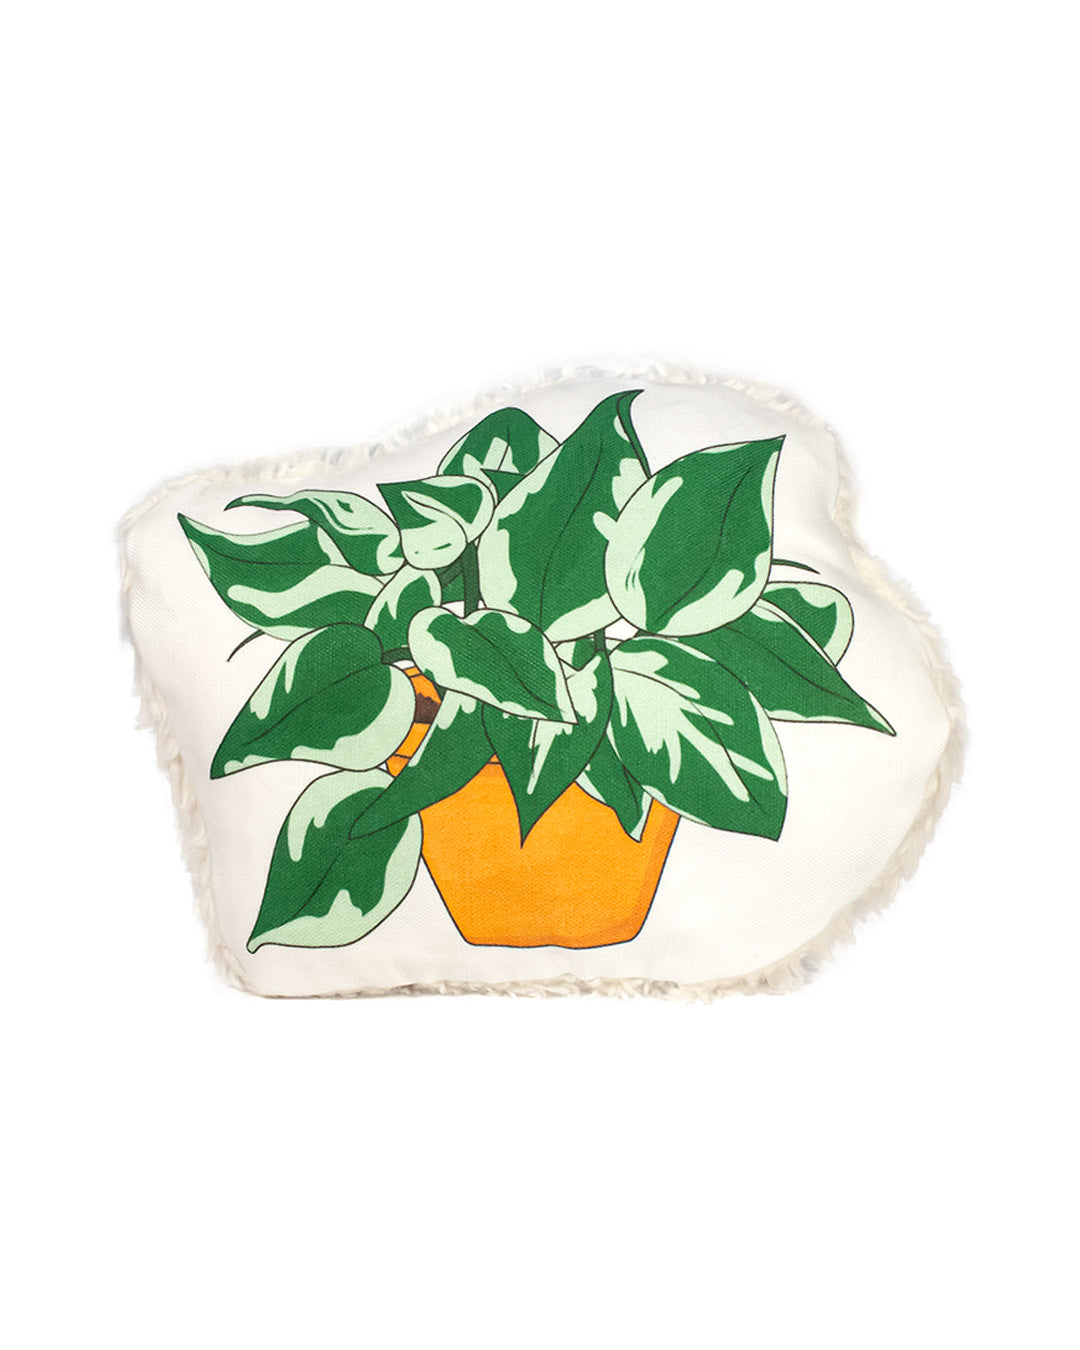 Eco-friendly dog toy shaped like a marble pothos plant in a terracotta pot. Made with durable canvas and plush cotton sherpa. All materials are non-toxic and vegan-friendly.